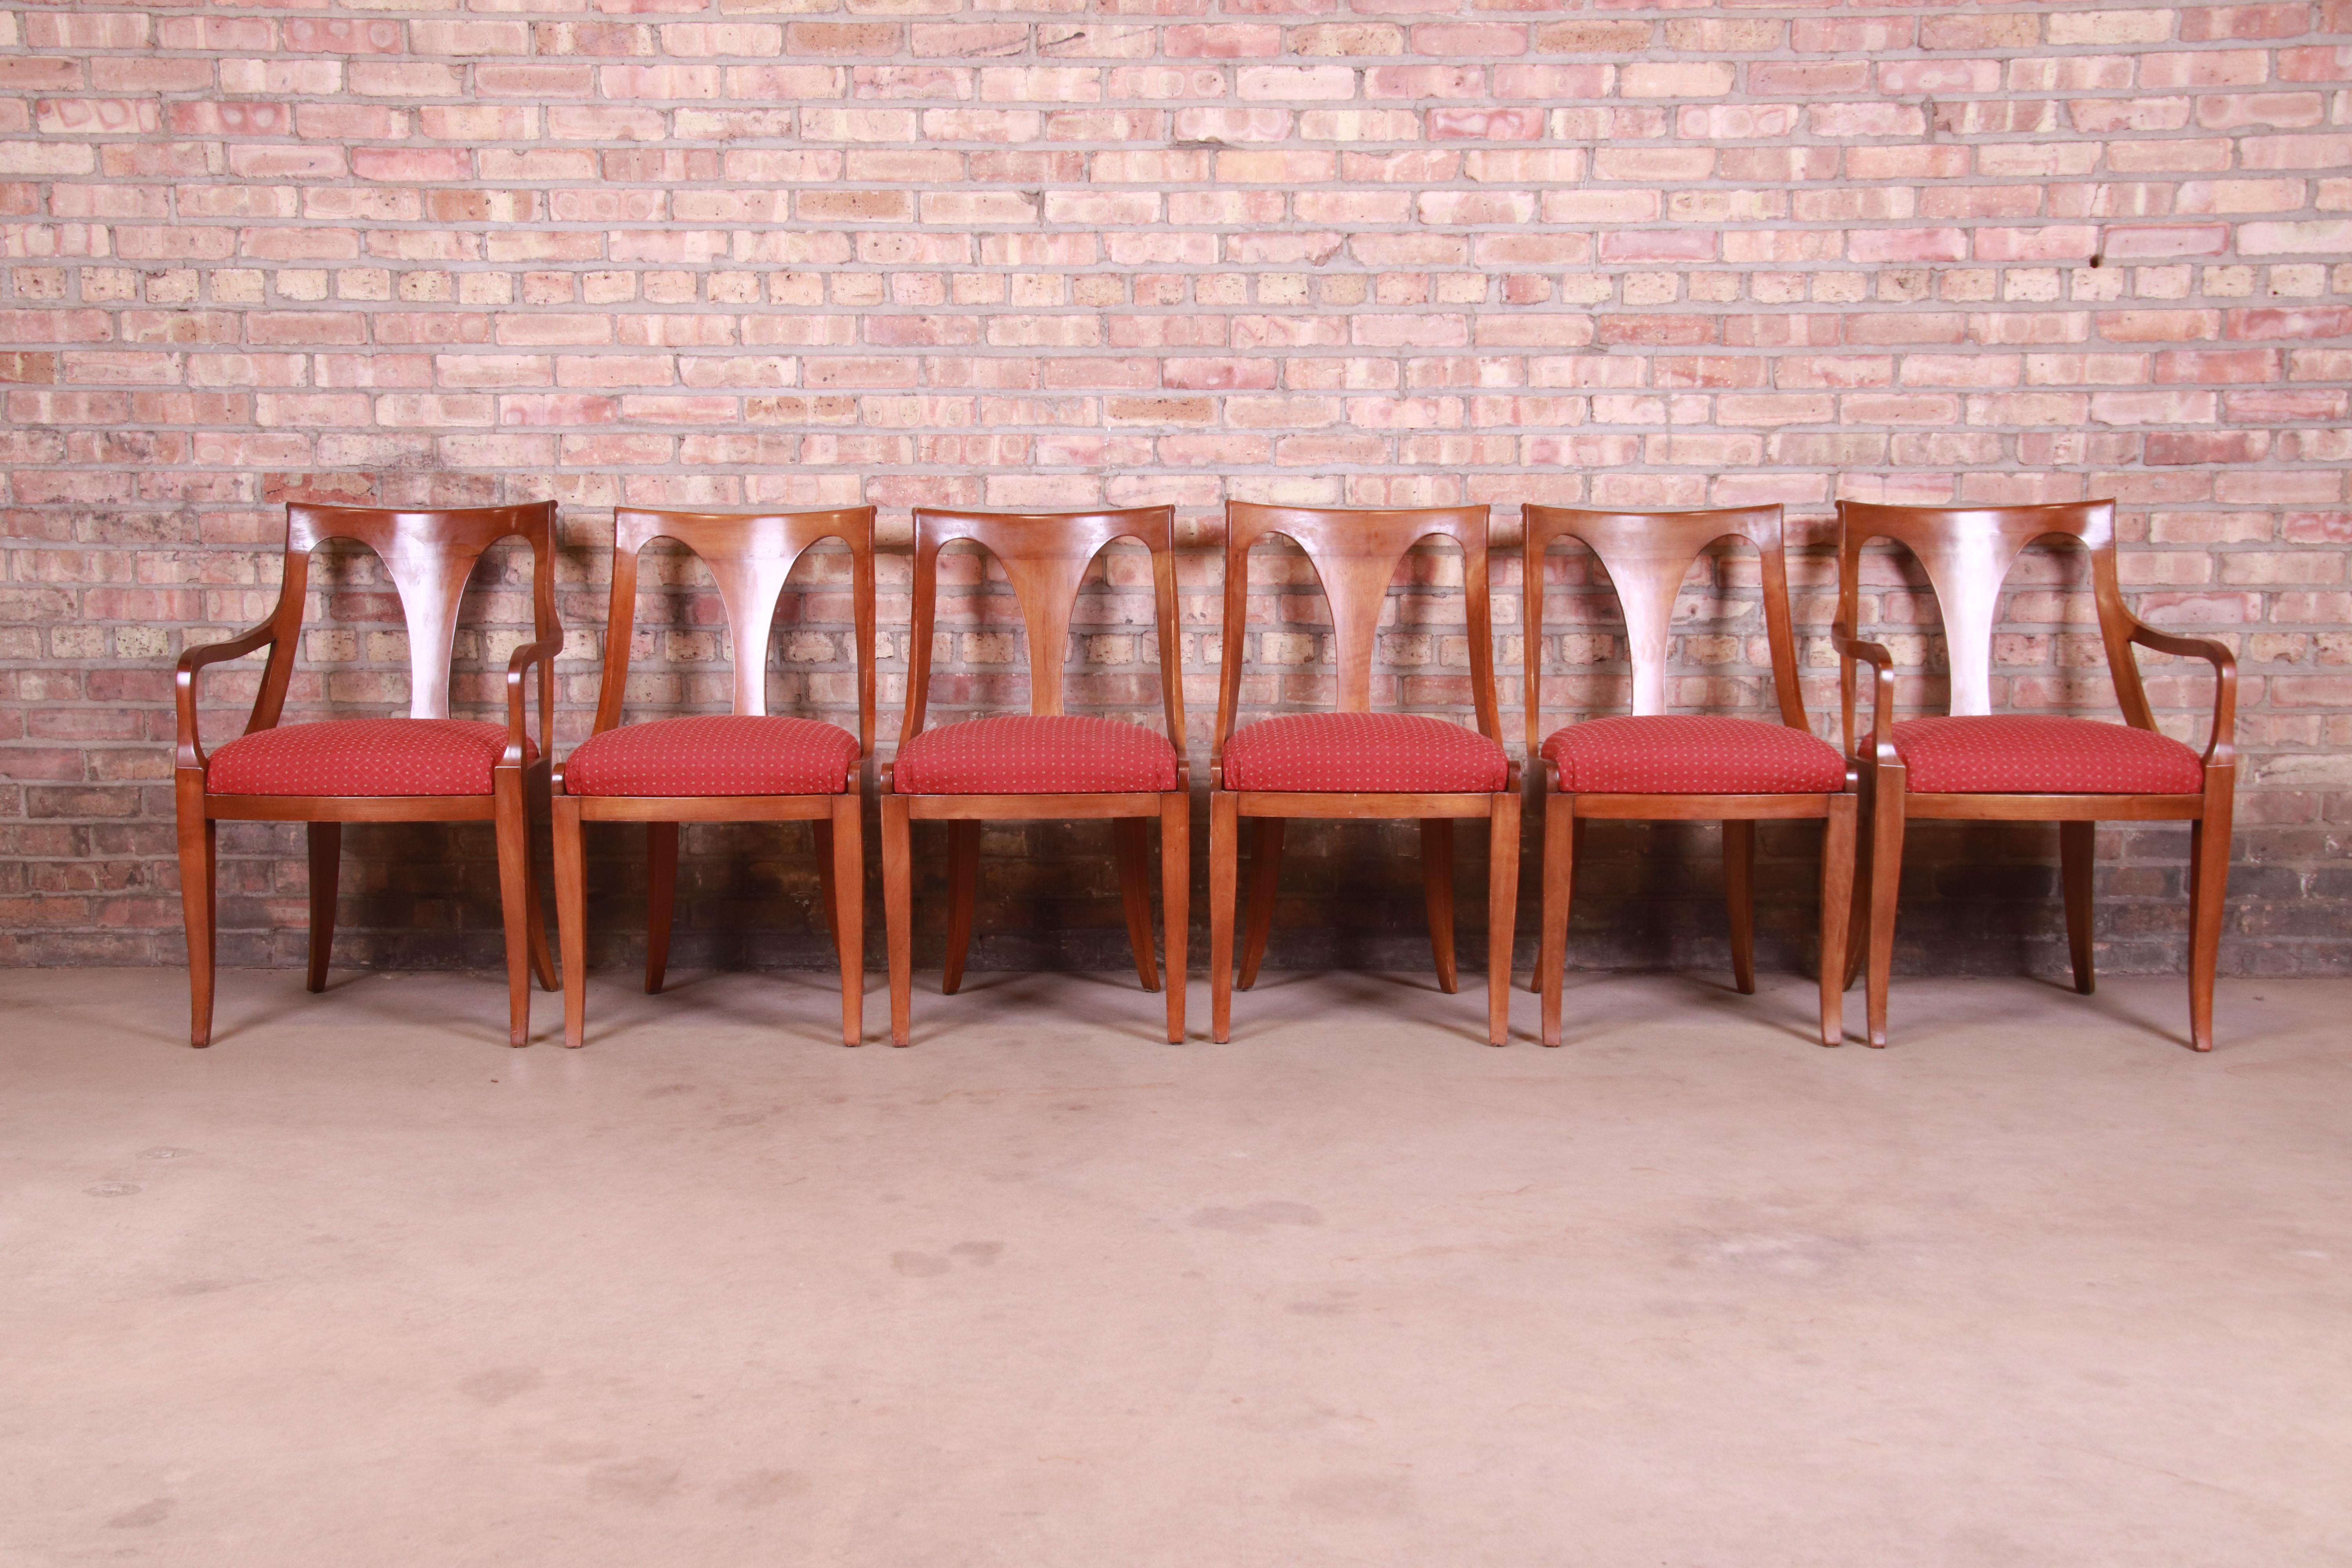 An outstanding set of six Regency style dining chairs

By Kindel Furniture

USA, mid-20th century

Solid cherry wood frames, with red upholstered seats.

Measures:
Side chairs - 19.25